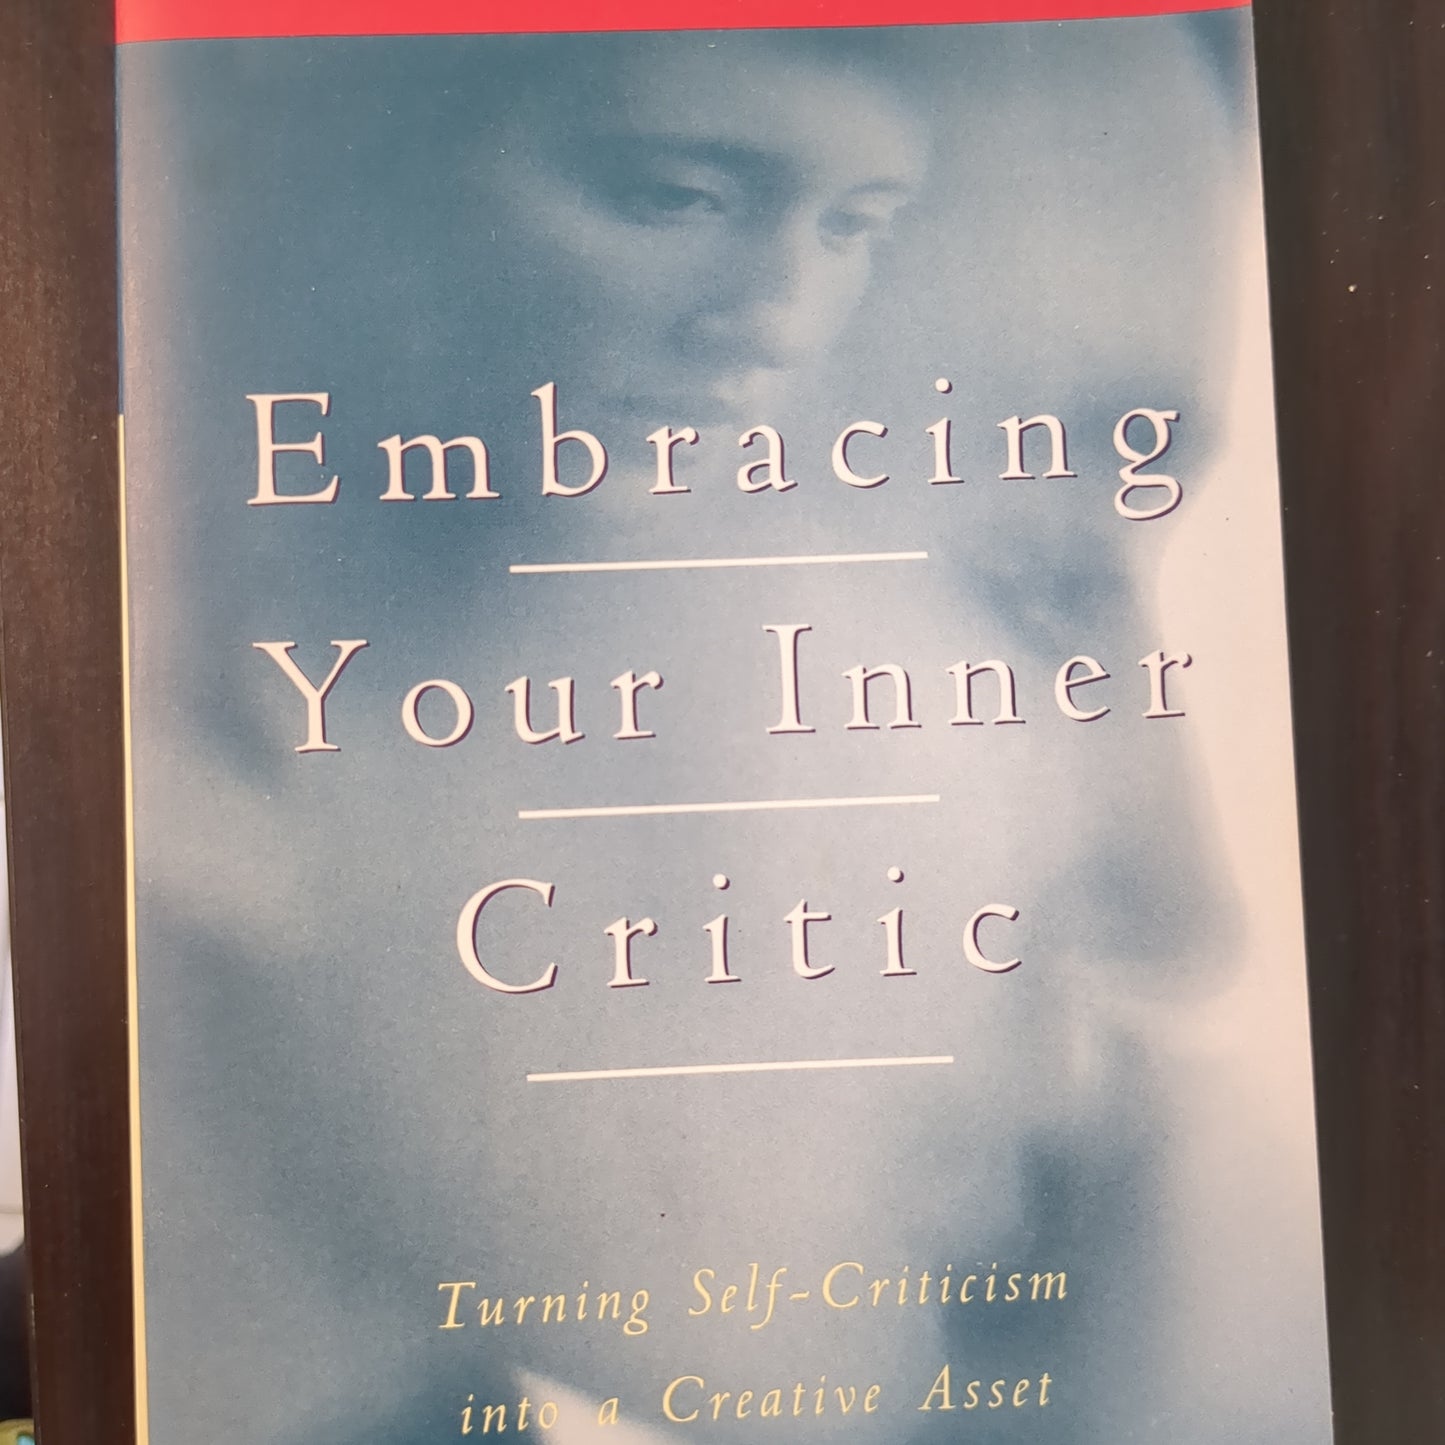 Embracing your inner critic turning self-criticism into a creative asset